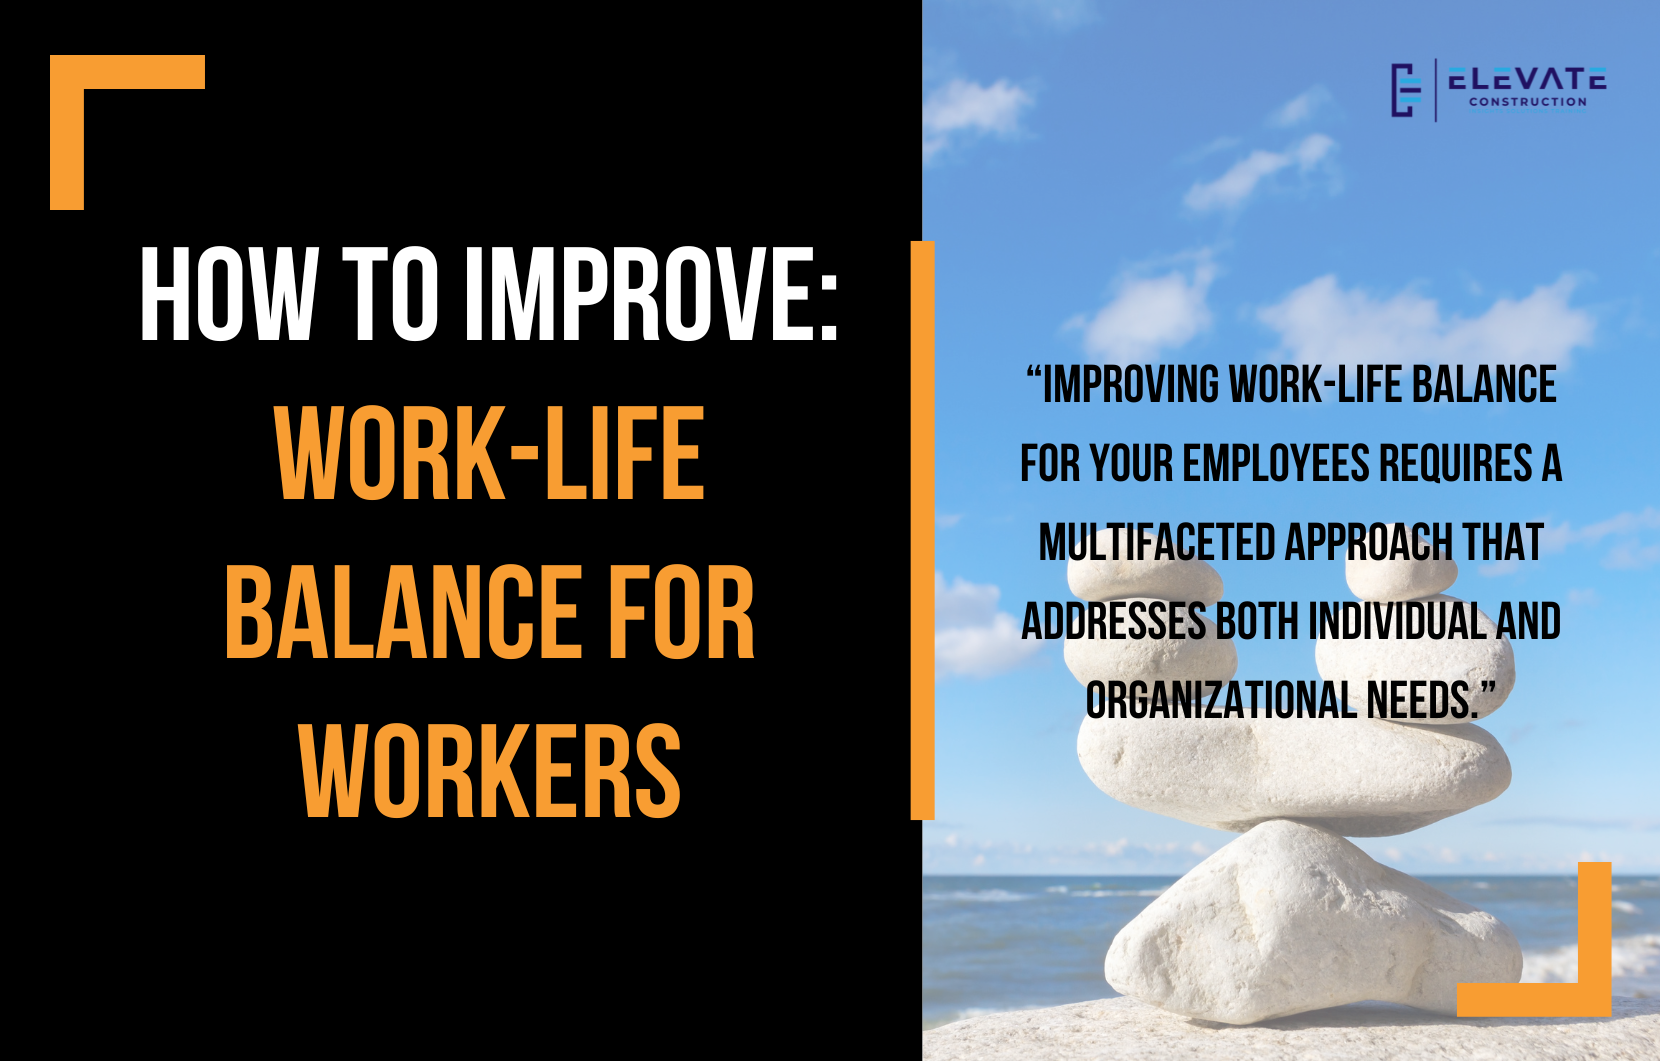 How To Improve Work-Life Balance For Employees